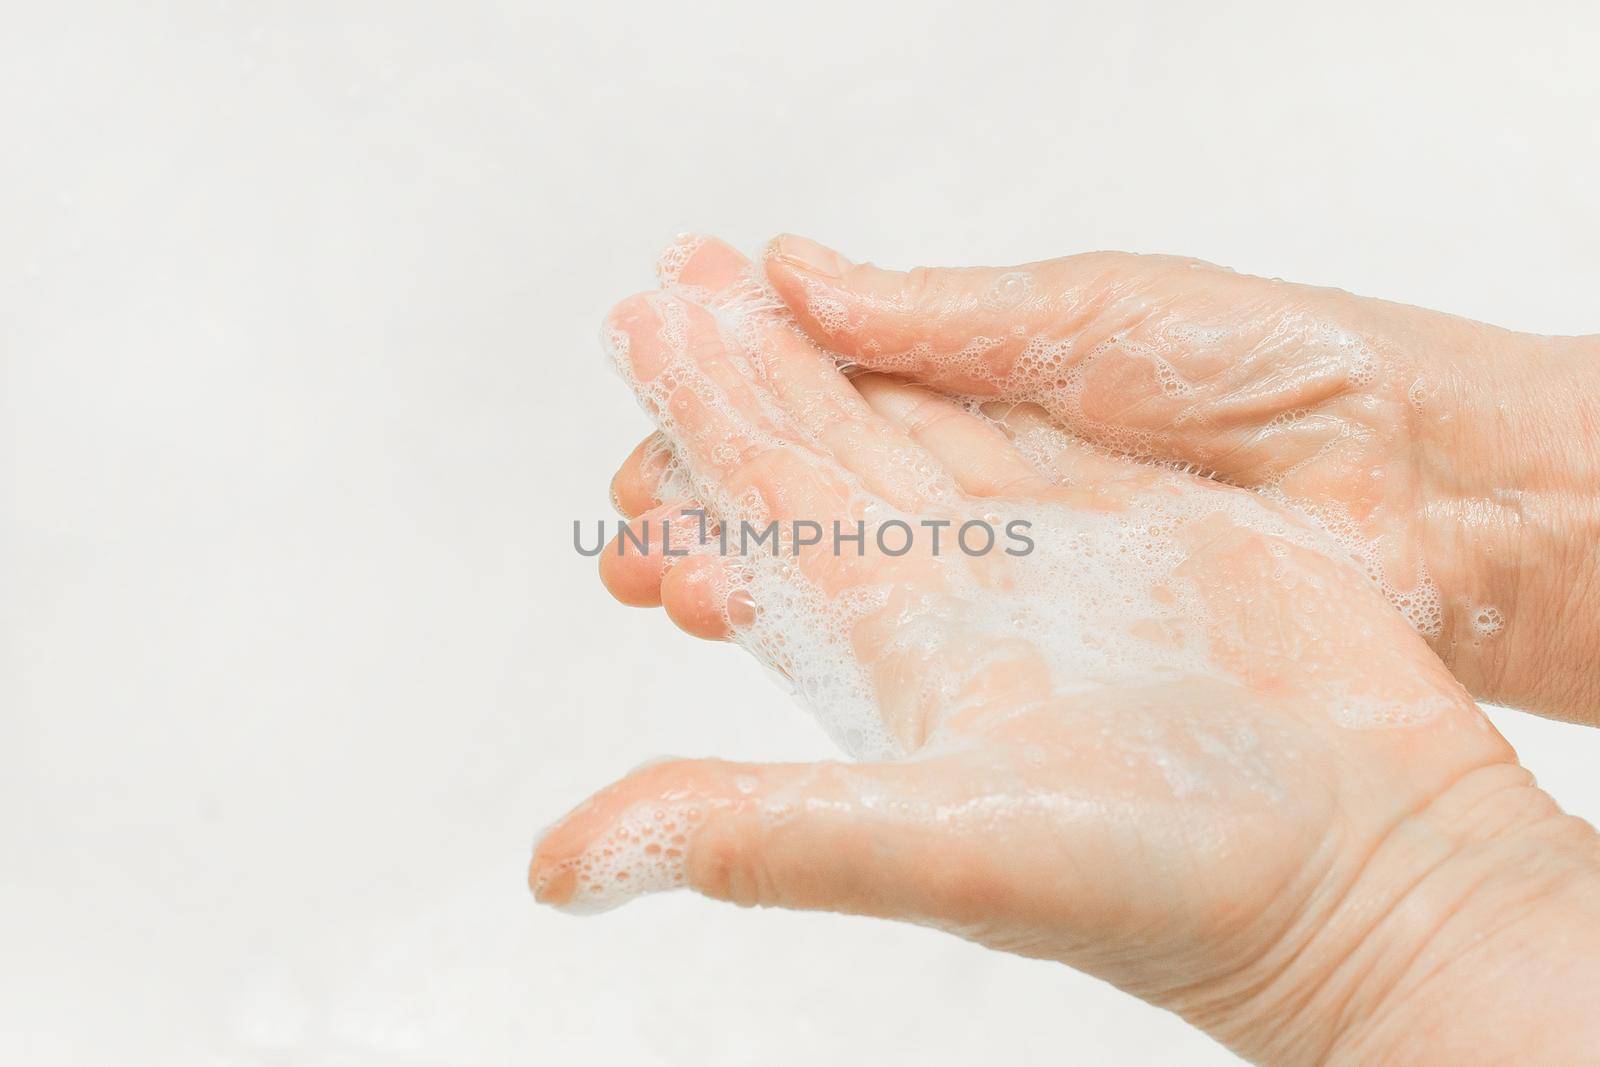 An adult woman's hands lathered with soap, close-up. Hand washing and domestic hygiene concept.